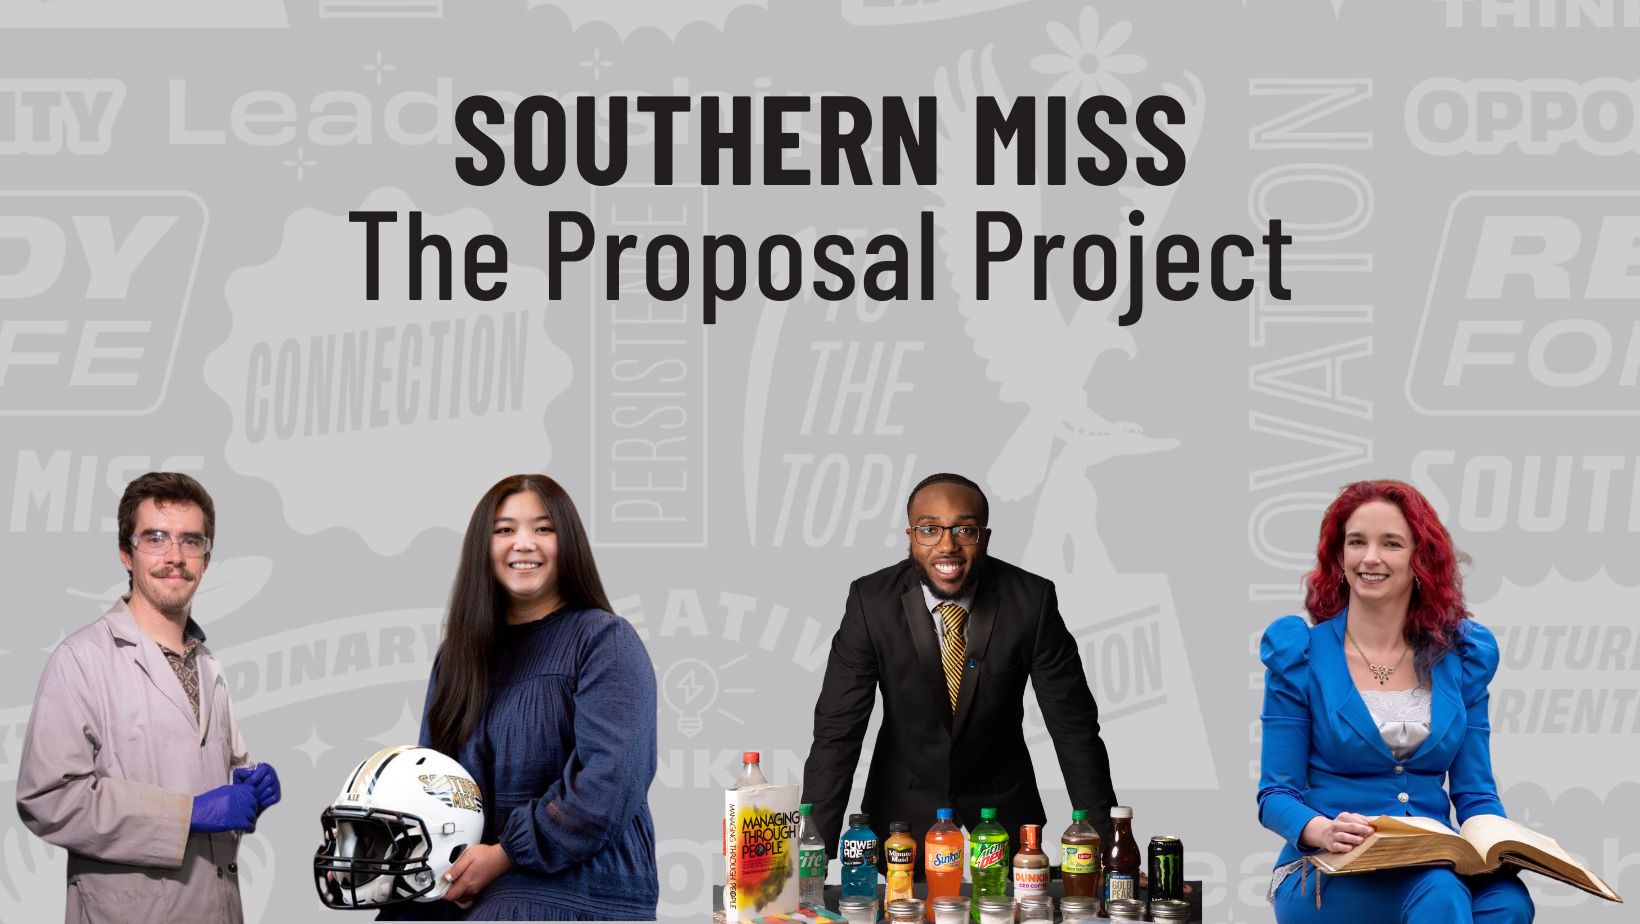 The Proposal Project